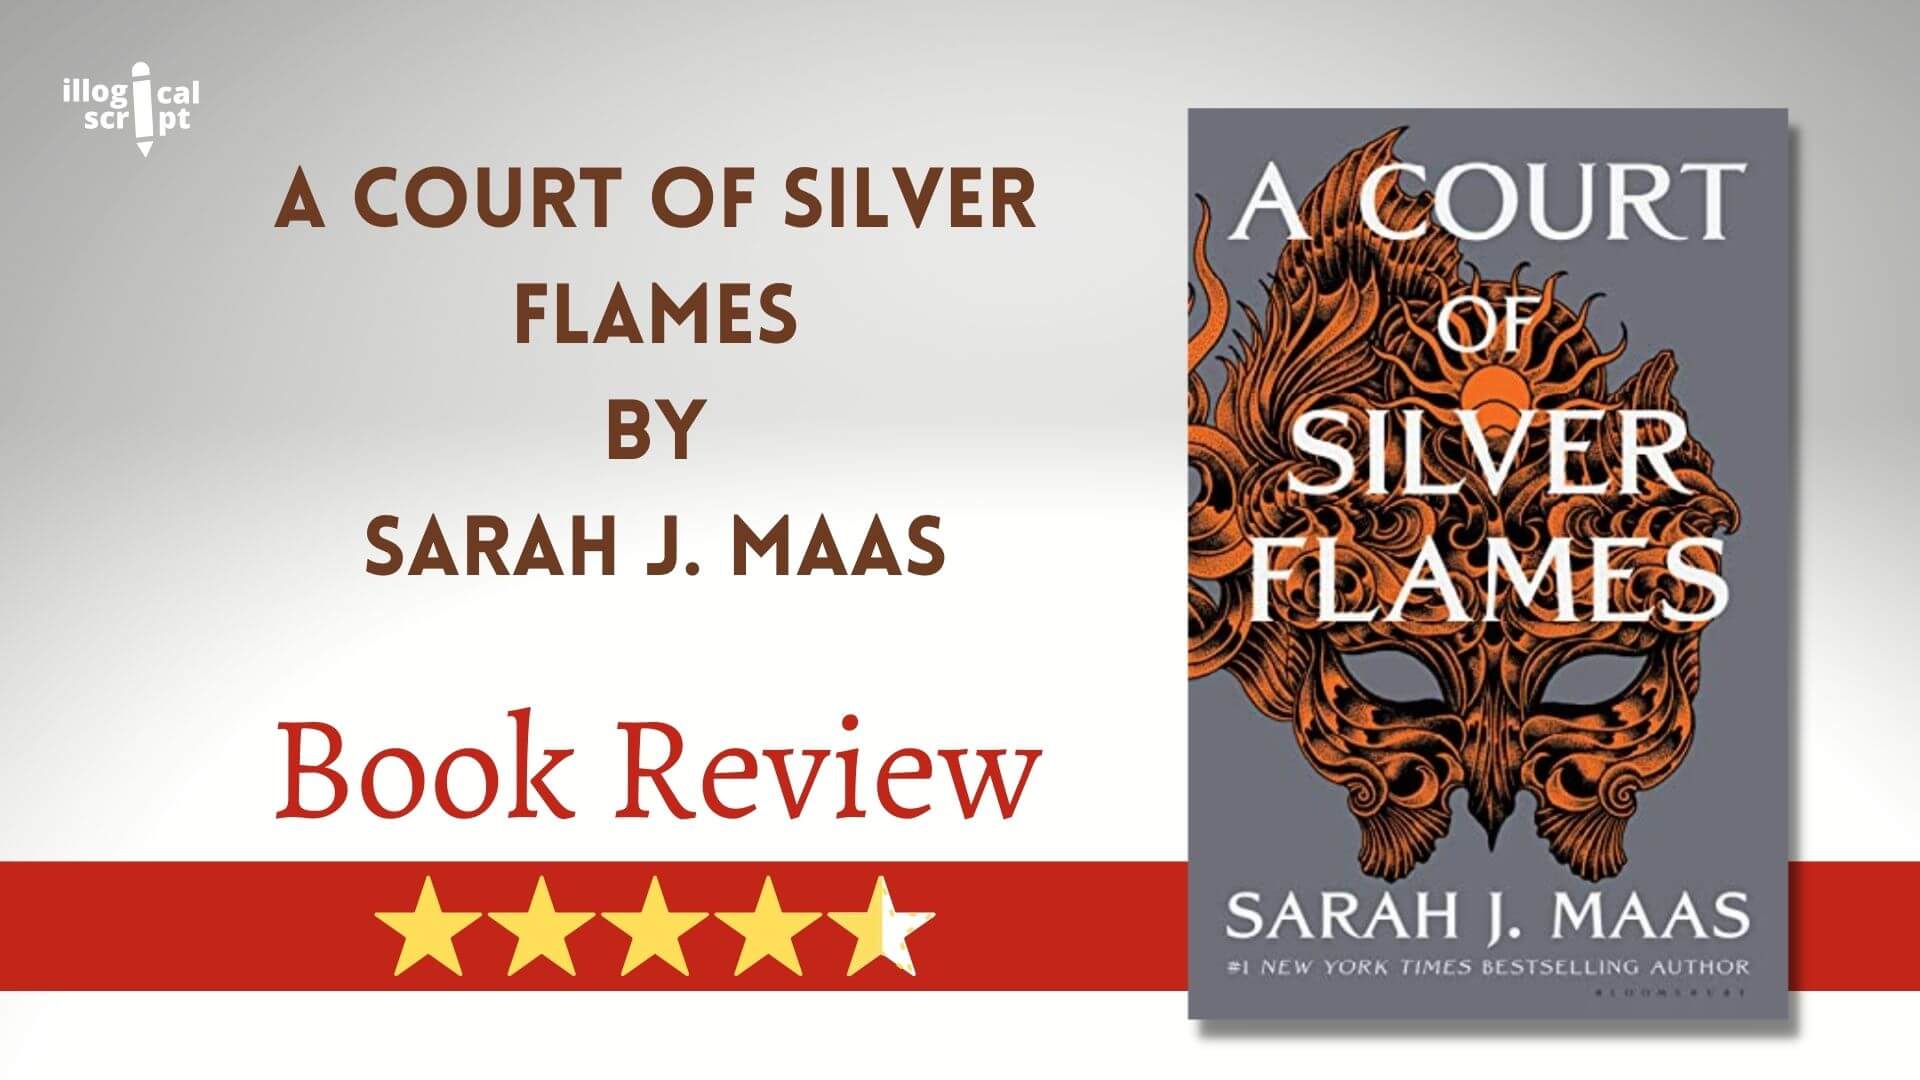 Book Review: A Court of Silver Flames by Sarah J. Maas